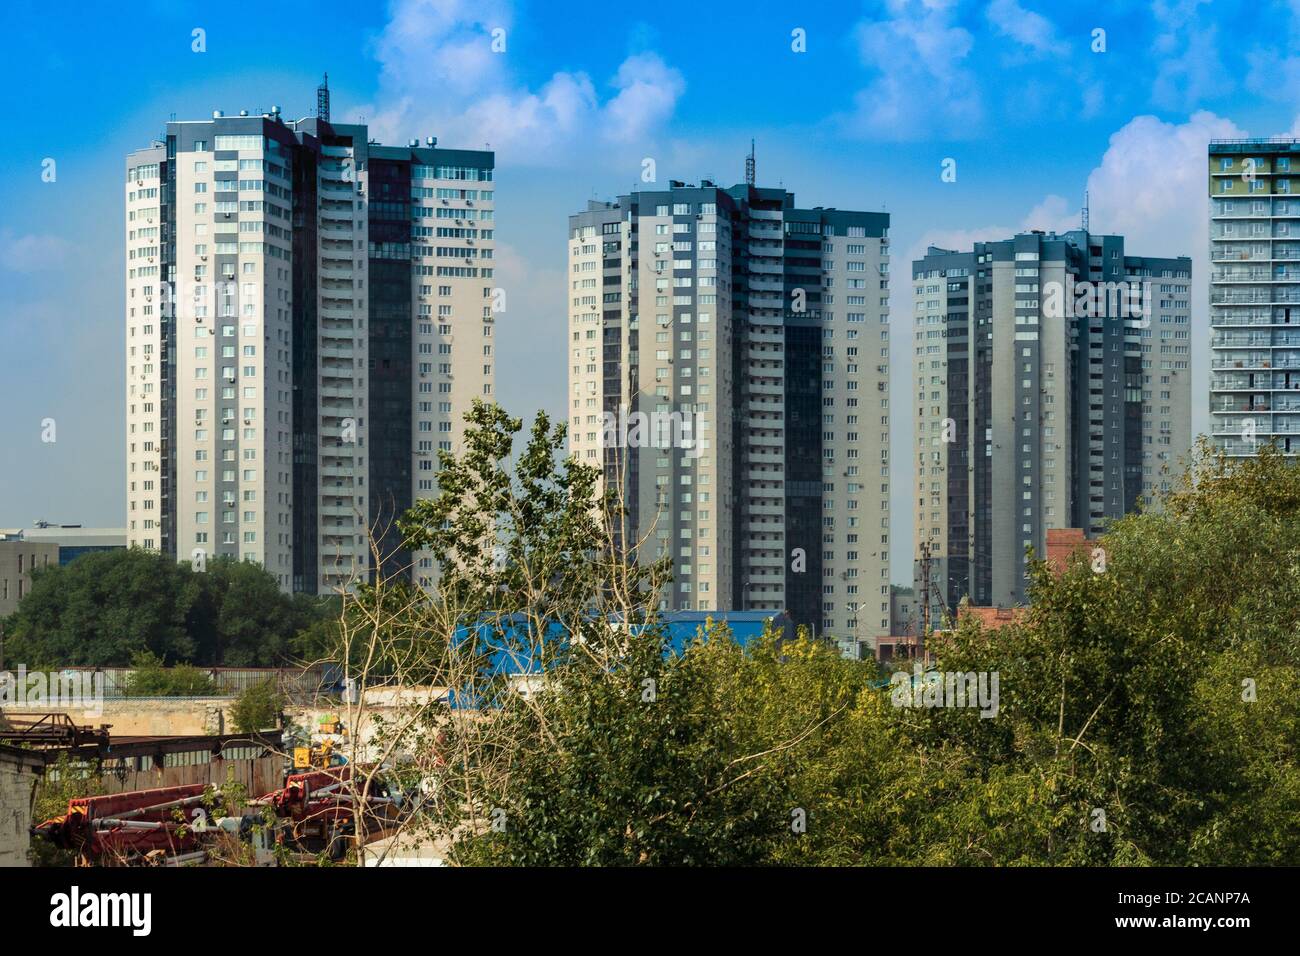 Multi-storey apartment buildings on the banks of rivers. The photo was taken on the banks of the Miass River, Chelyabinsk, Russia. Stock Photo